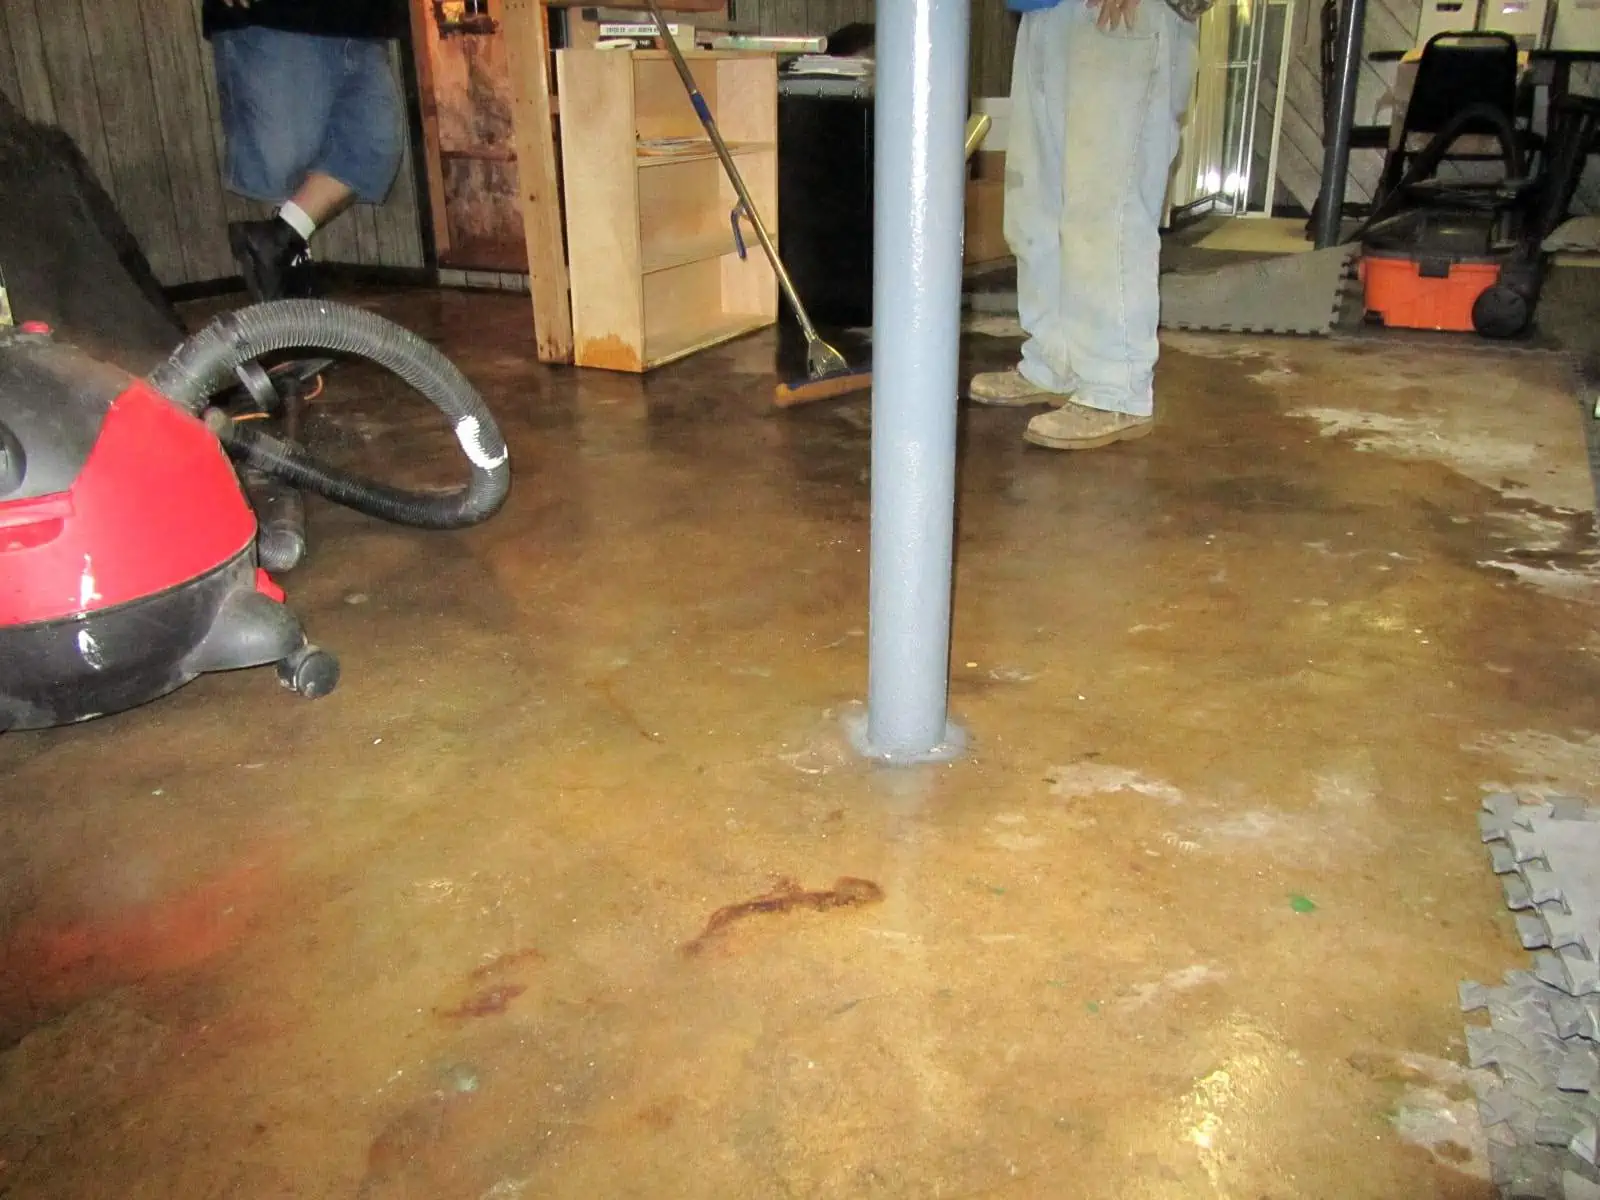 A flooded apartment located in a basement.